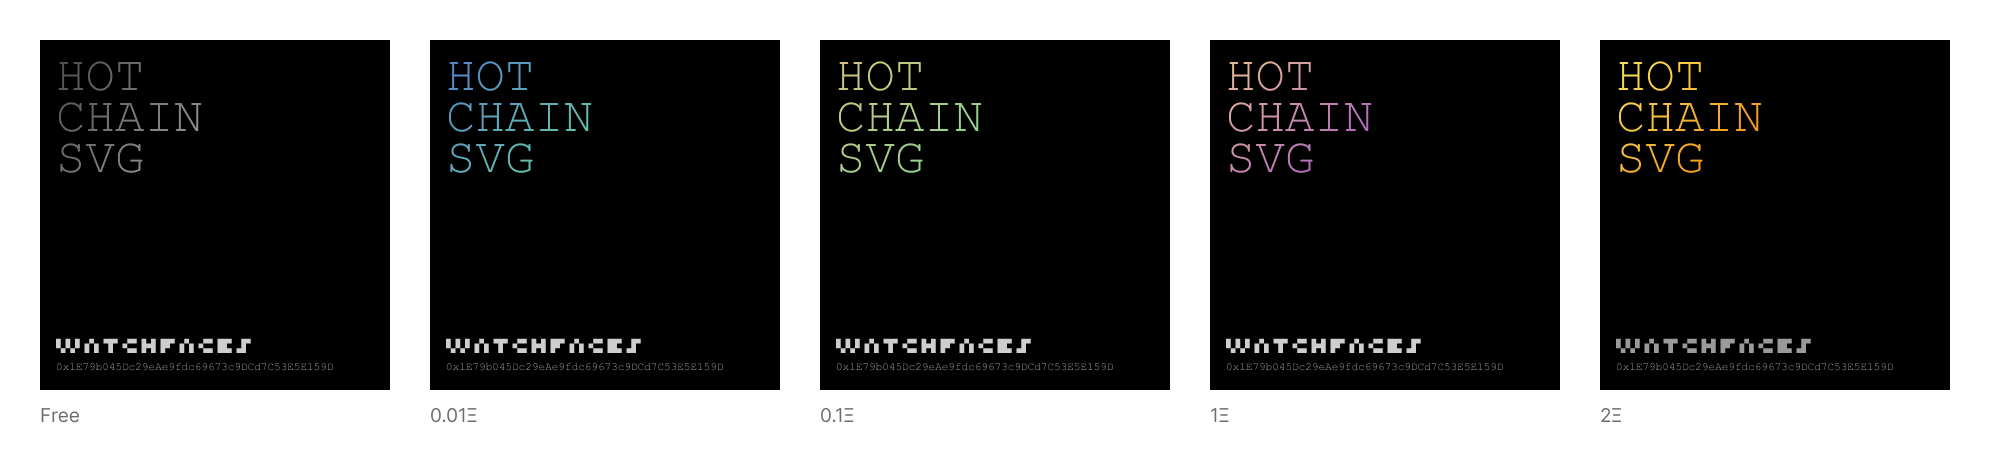 Projects using Hot Chain SVG